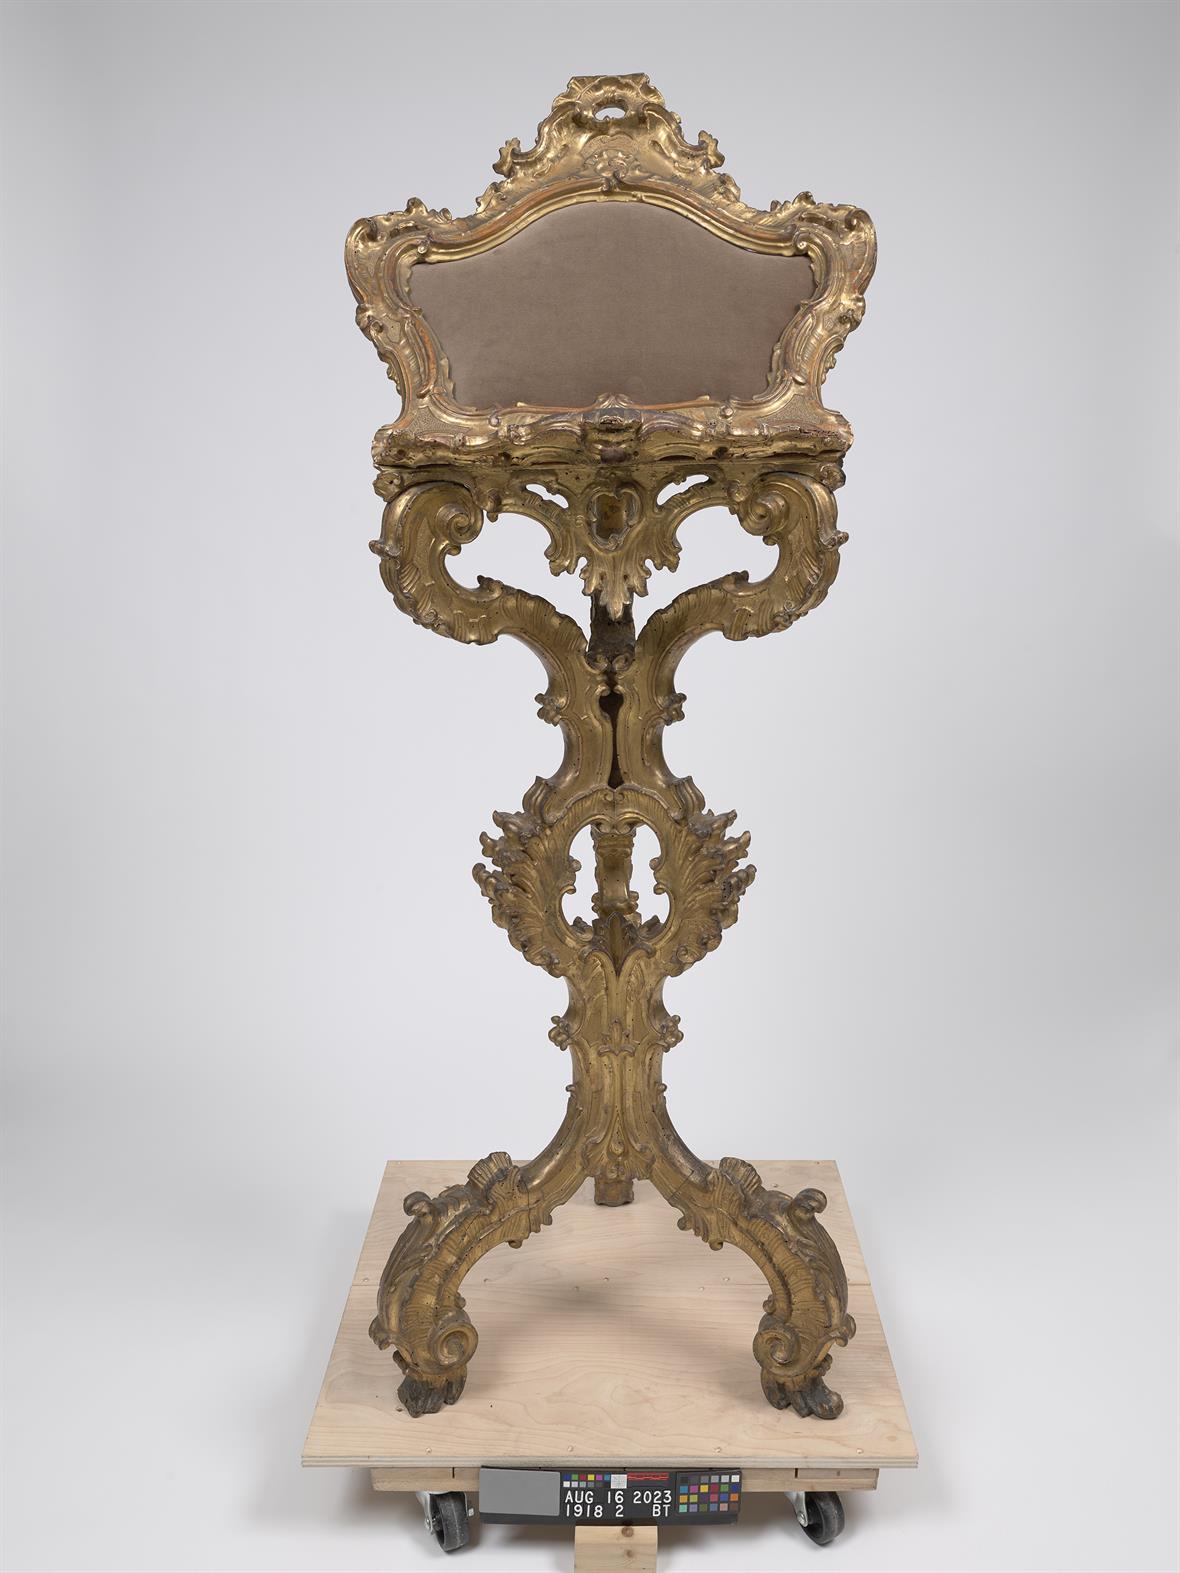 An ornately gilded and carved wooden object sits on a platform.